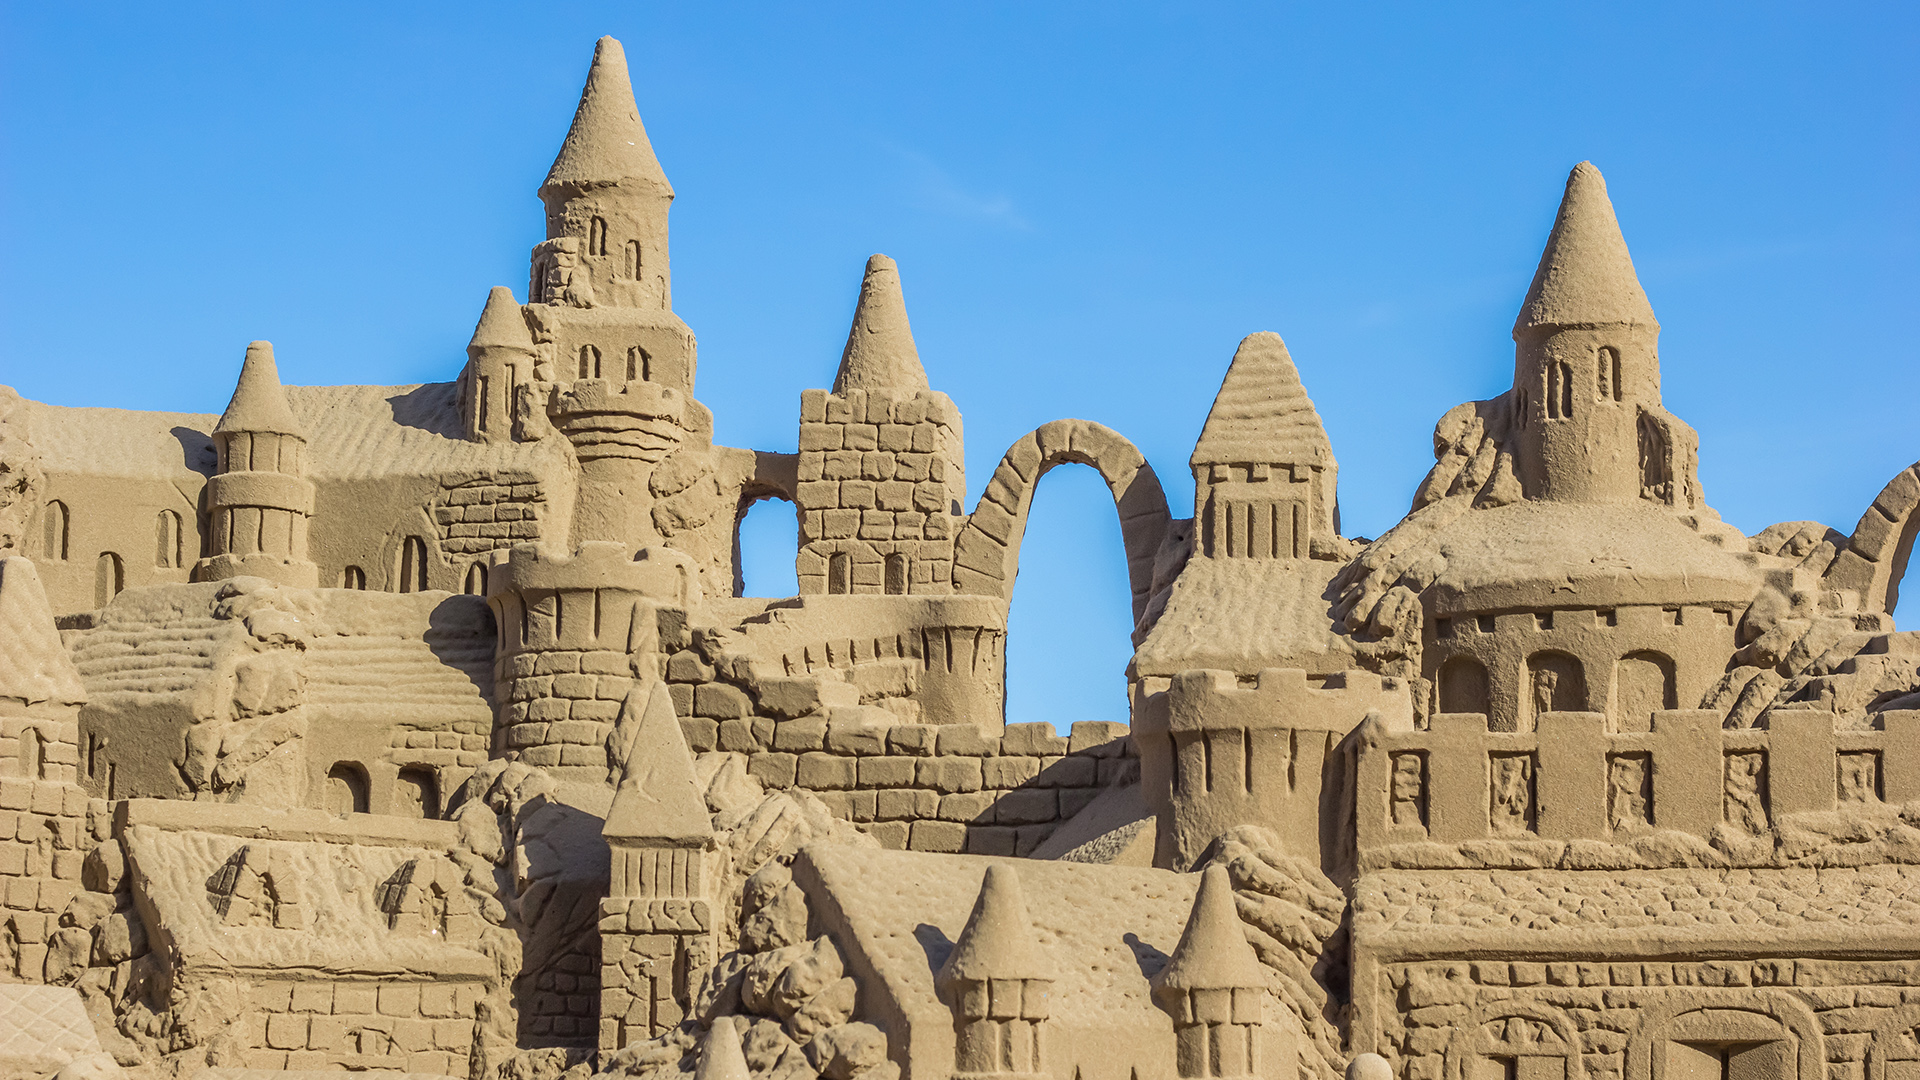 How to build the perfect sand castle according to science

